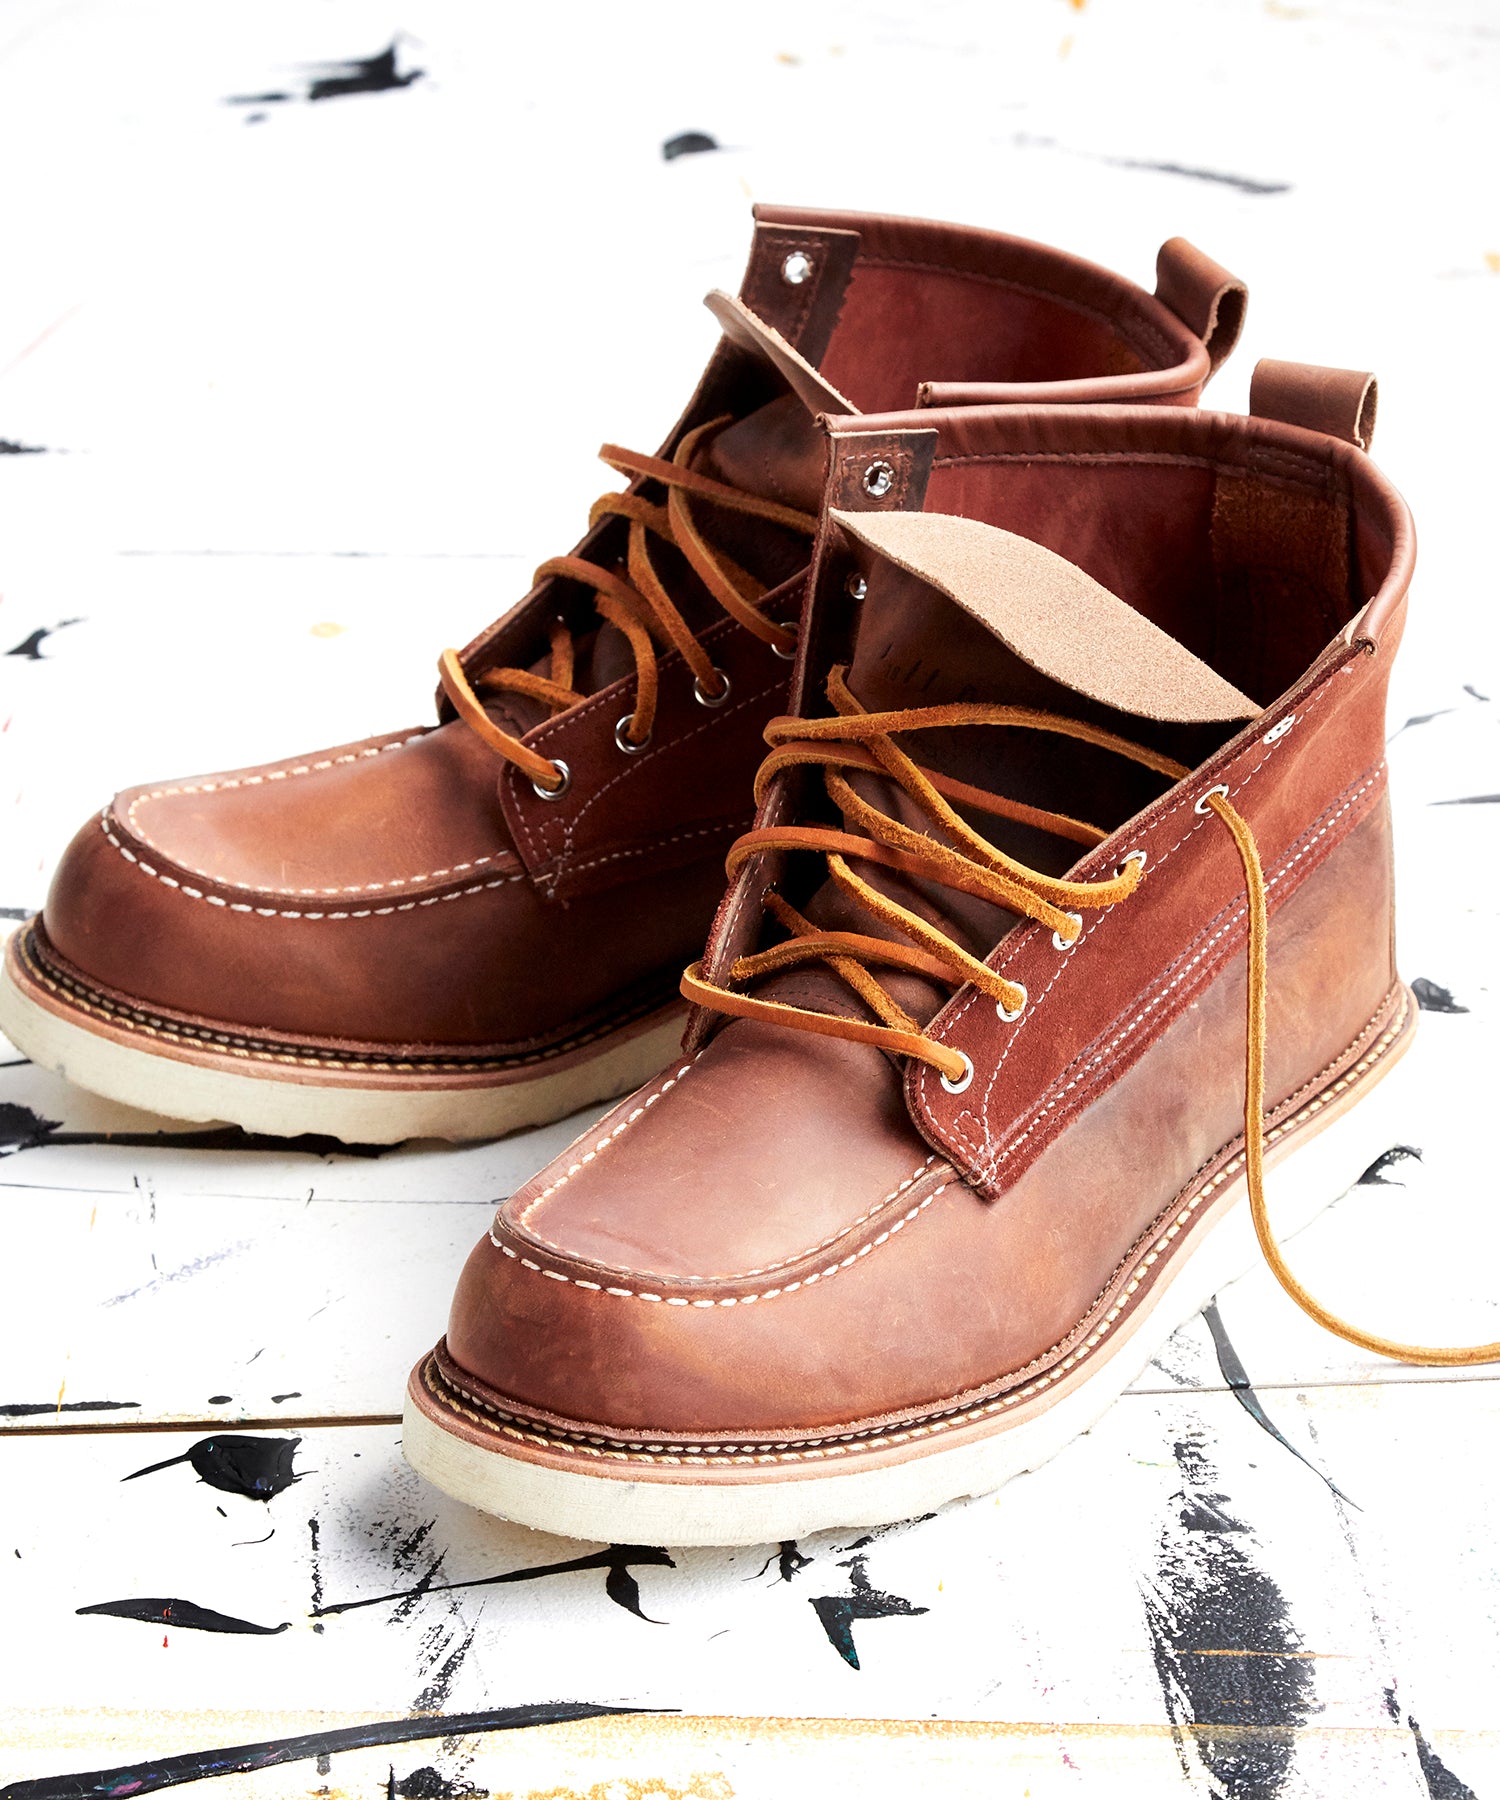 red wing tan boots